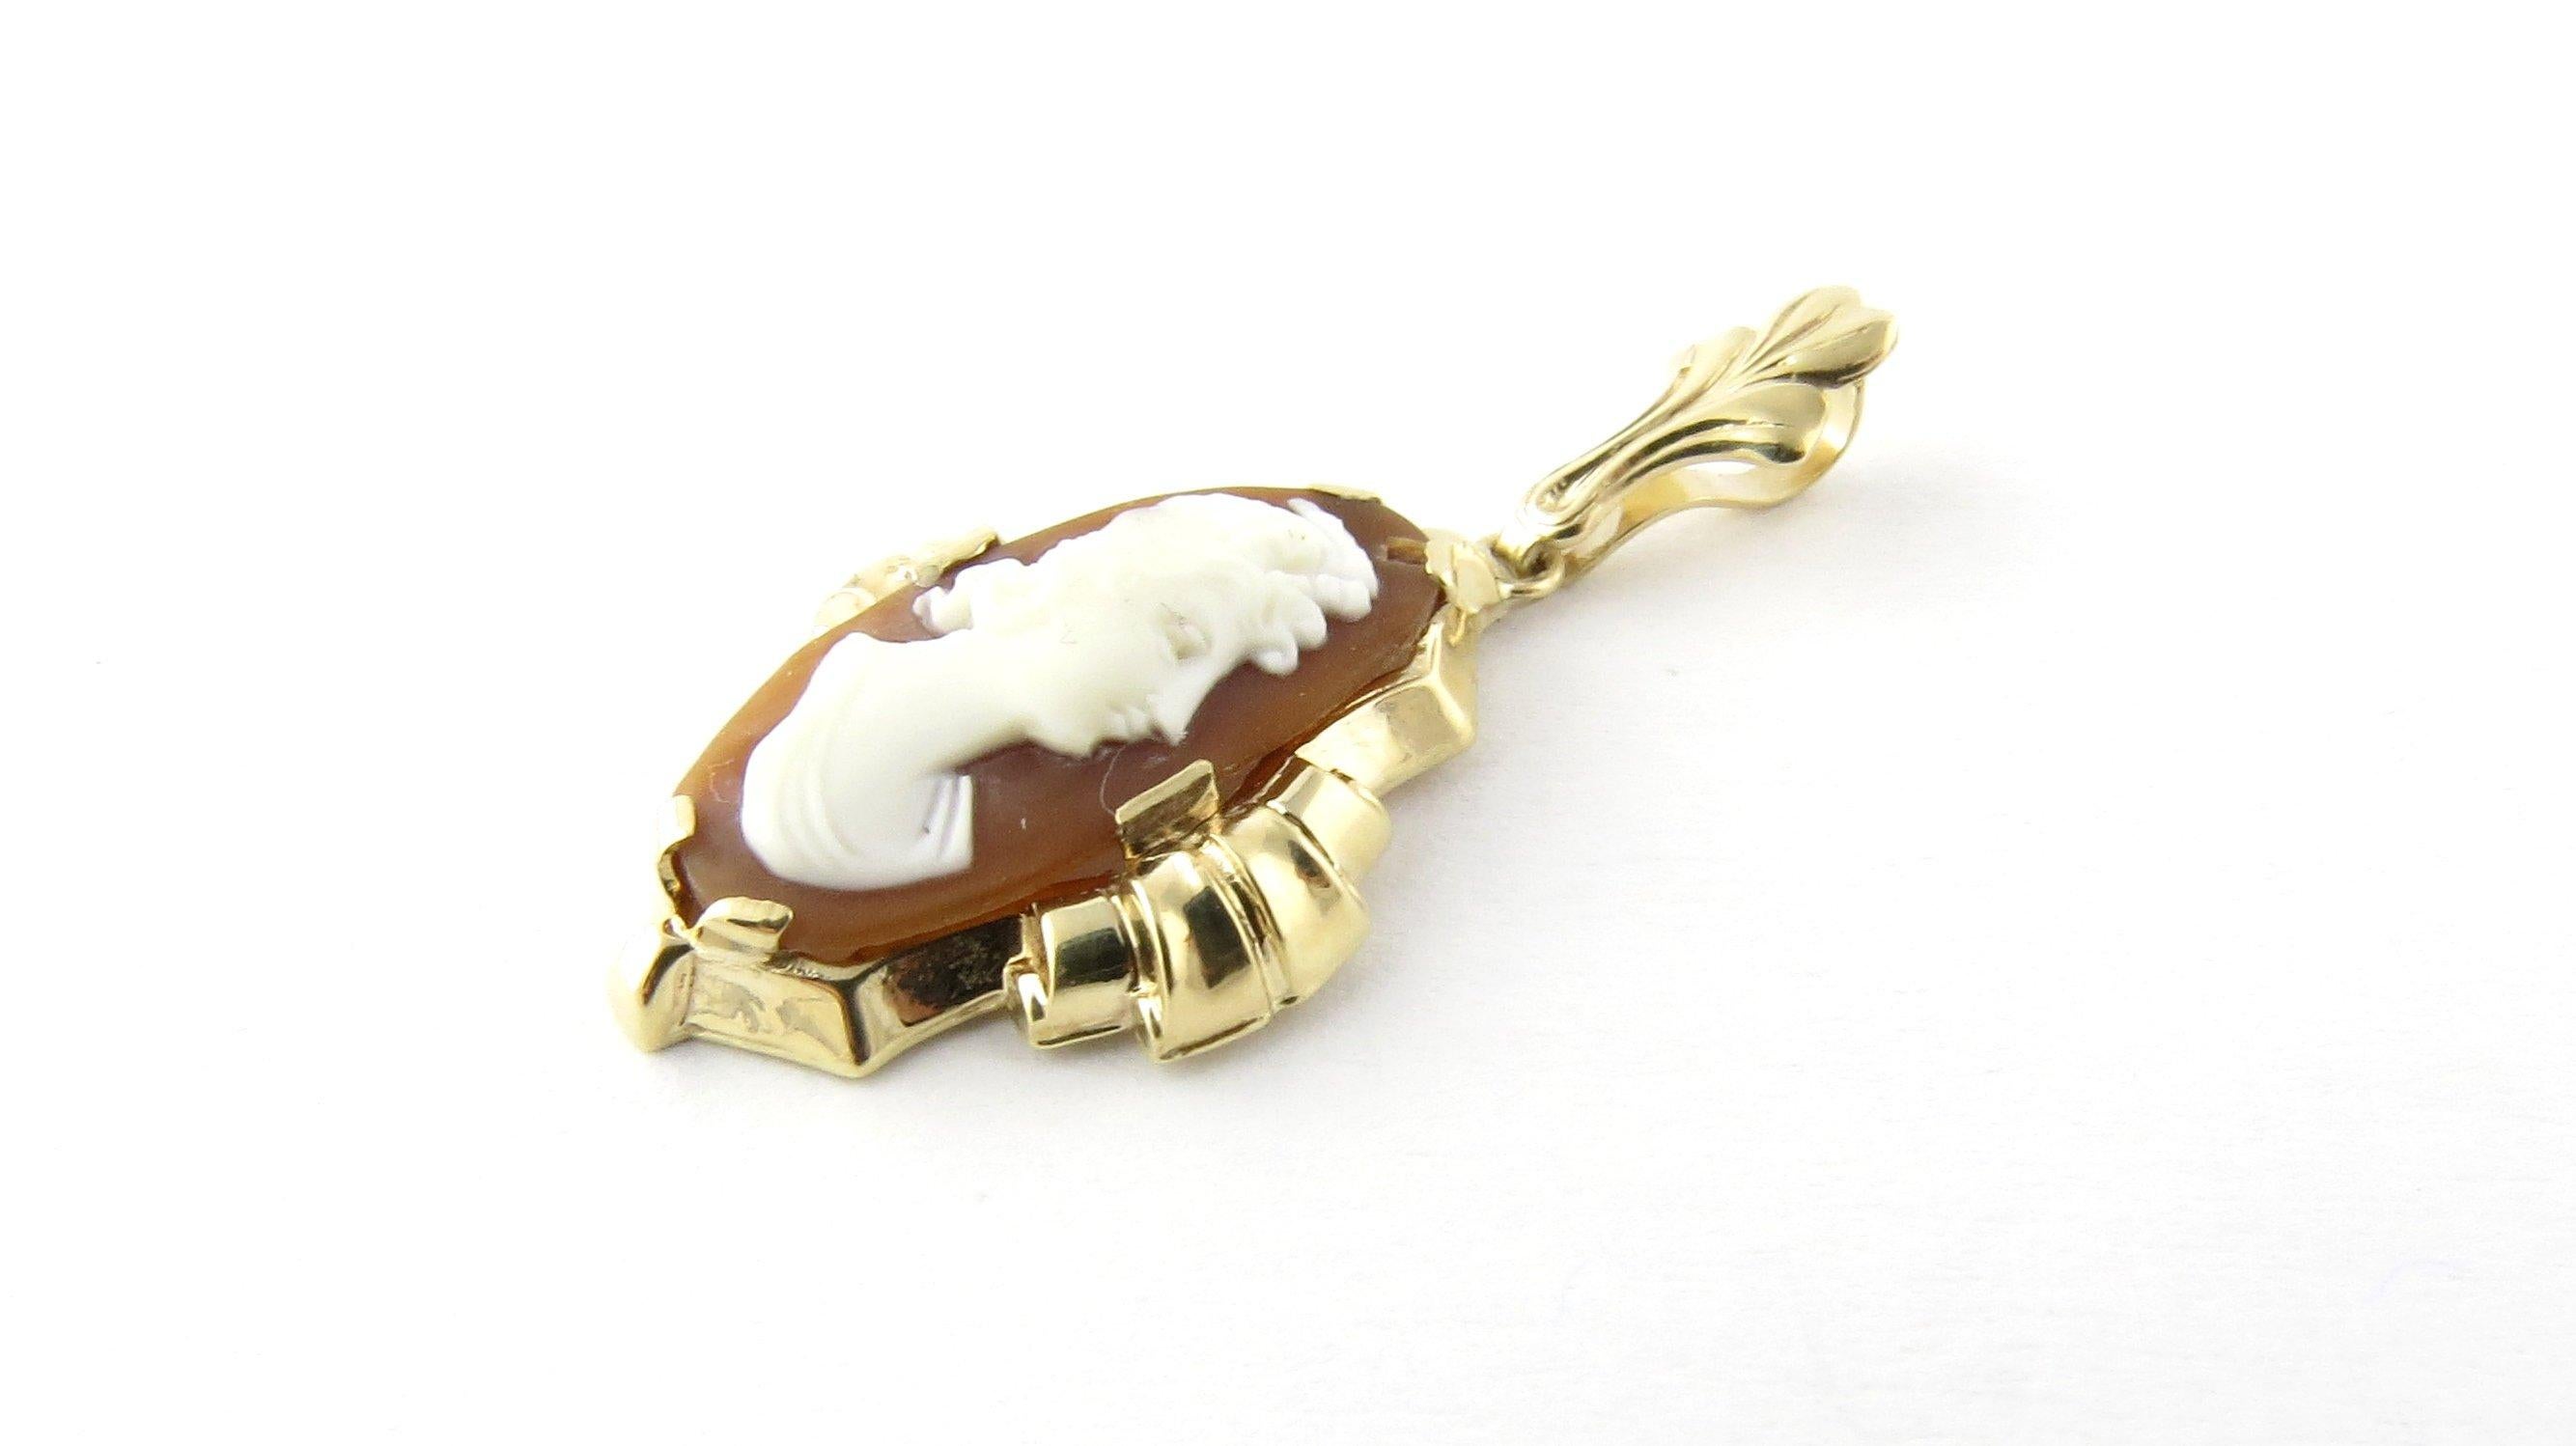 Vintage 10 Karat Yellow Gold Cameo Pendant-

This classic cameo pendant features a lovely lady in profile framed in beautifully detailed 10K yellow gold.

Size: 24 mm x 16 mm (actual pendant)

Weight: 0.8 dwt. / 1.3 gr.

Hallmark: 10K

Very good